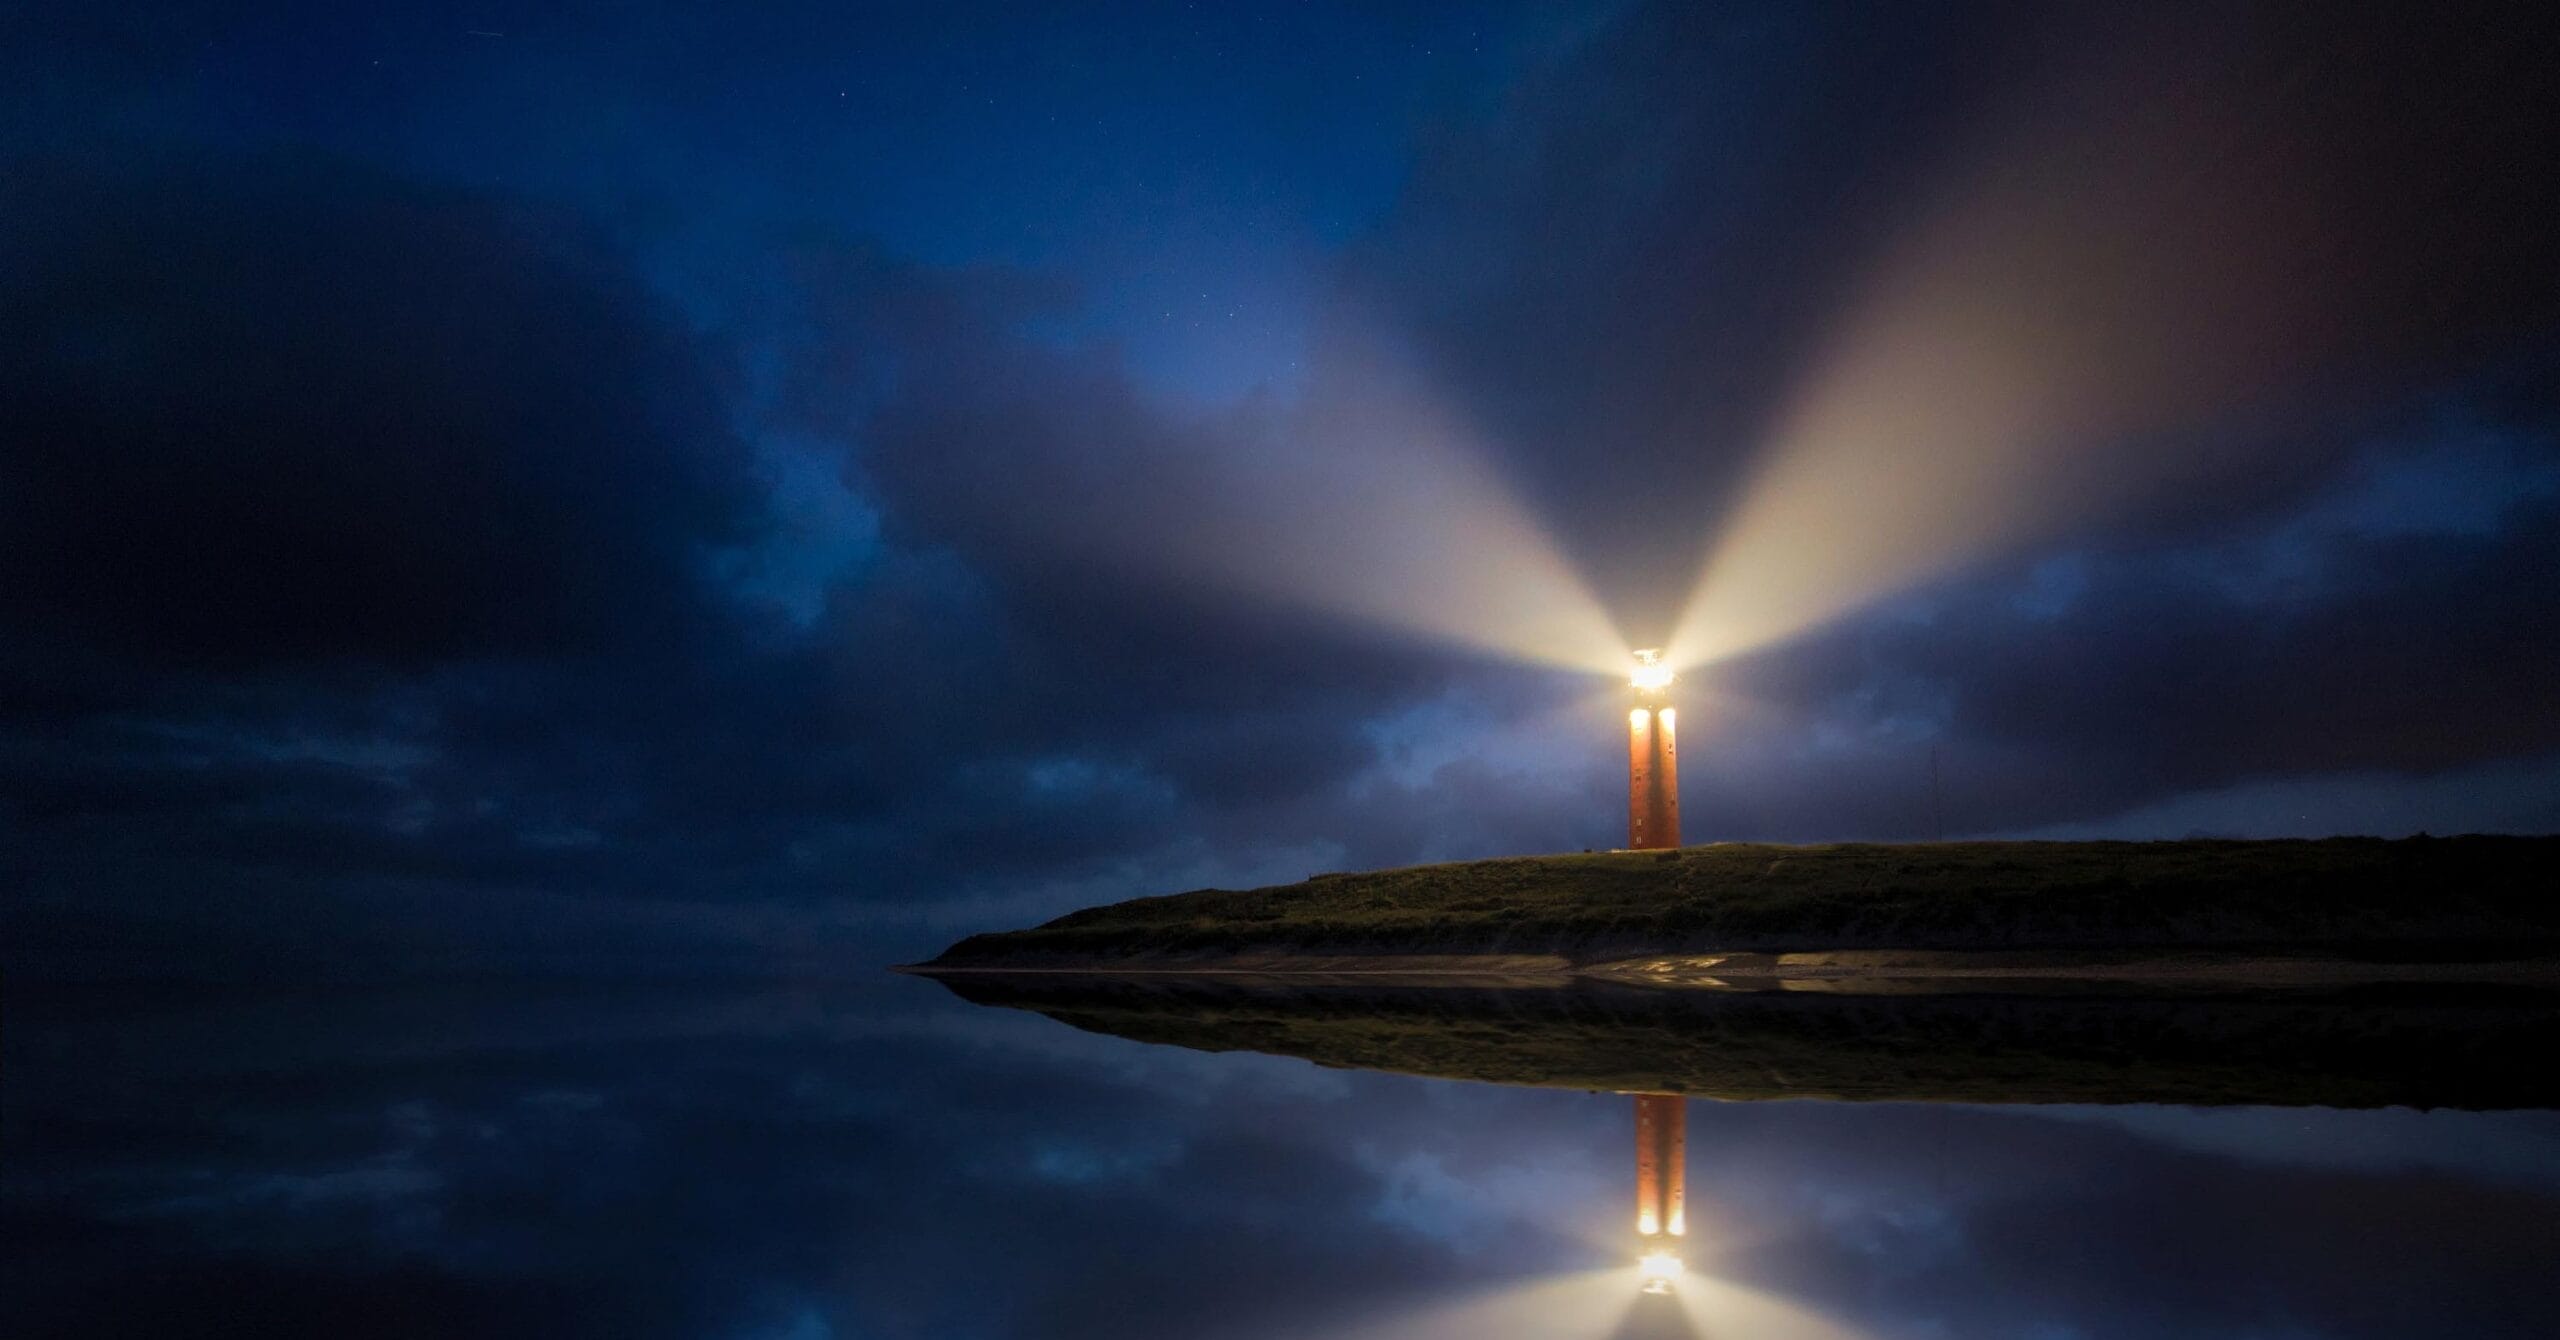 A lighthouse on a jetty sticking out into a body of water, showing light beams, implying hope and resilience